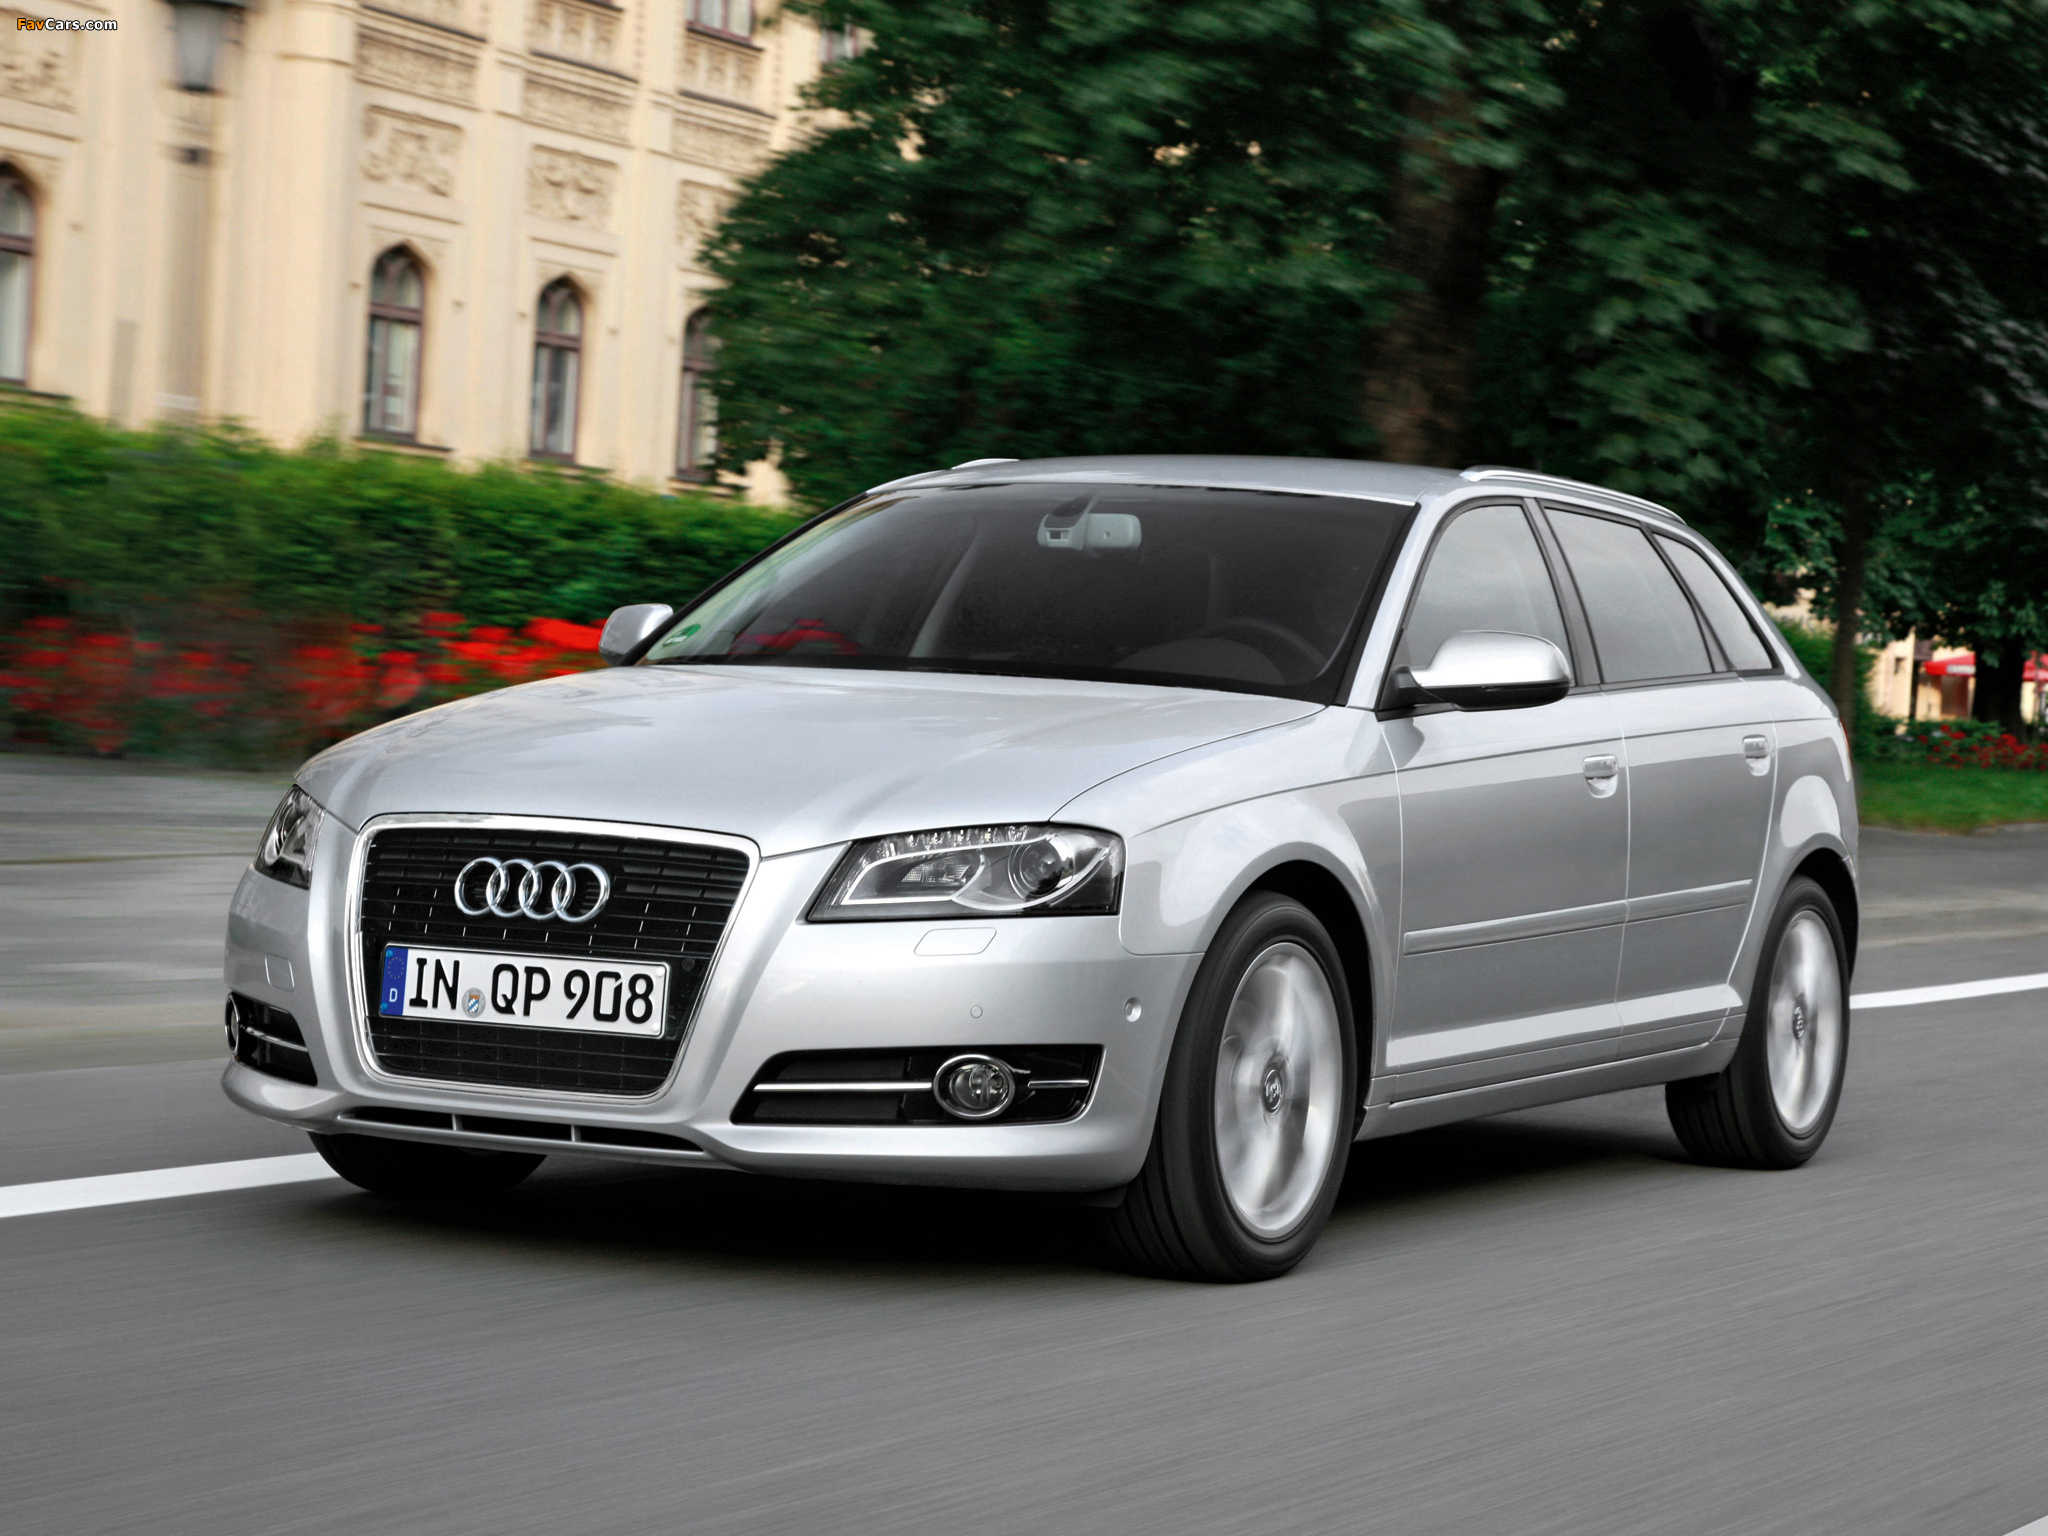 Pictures of Audi A3 Sportback TFSI 8PA (2010) (2048x1536)